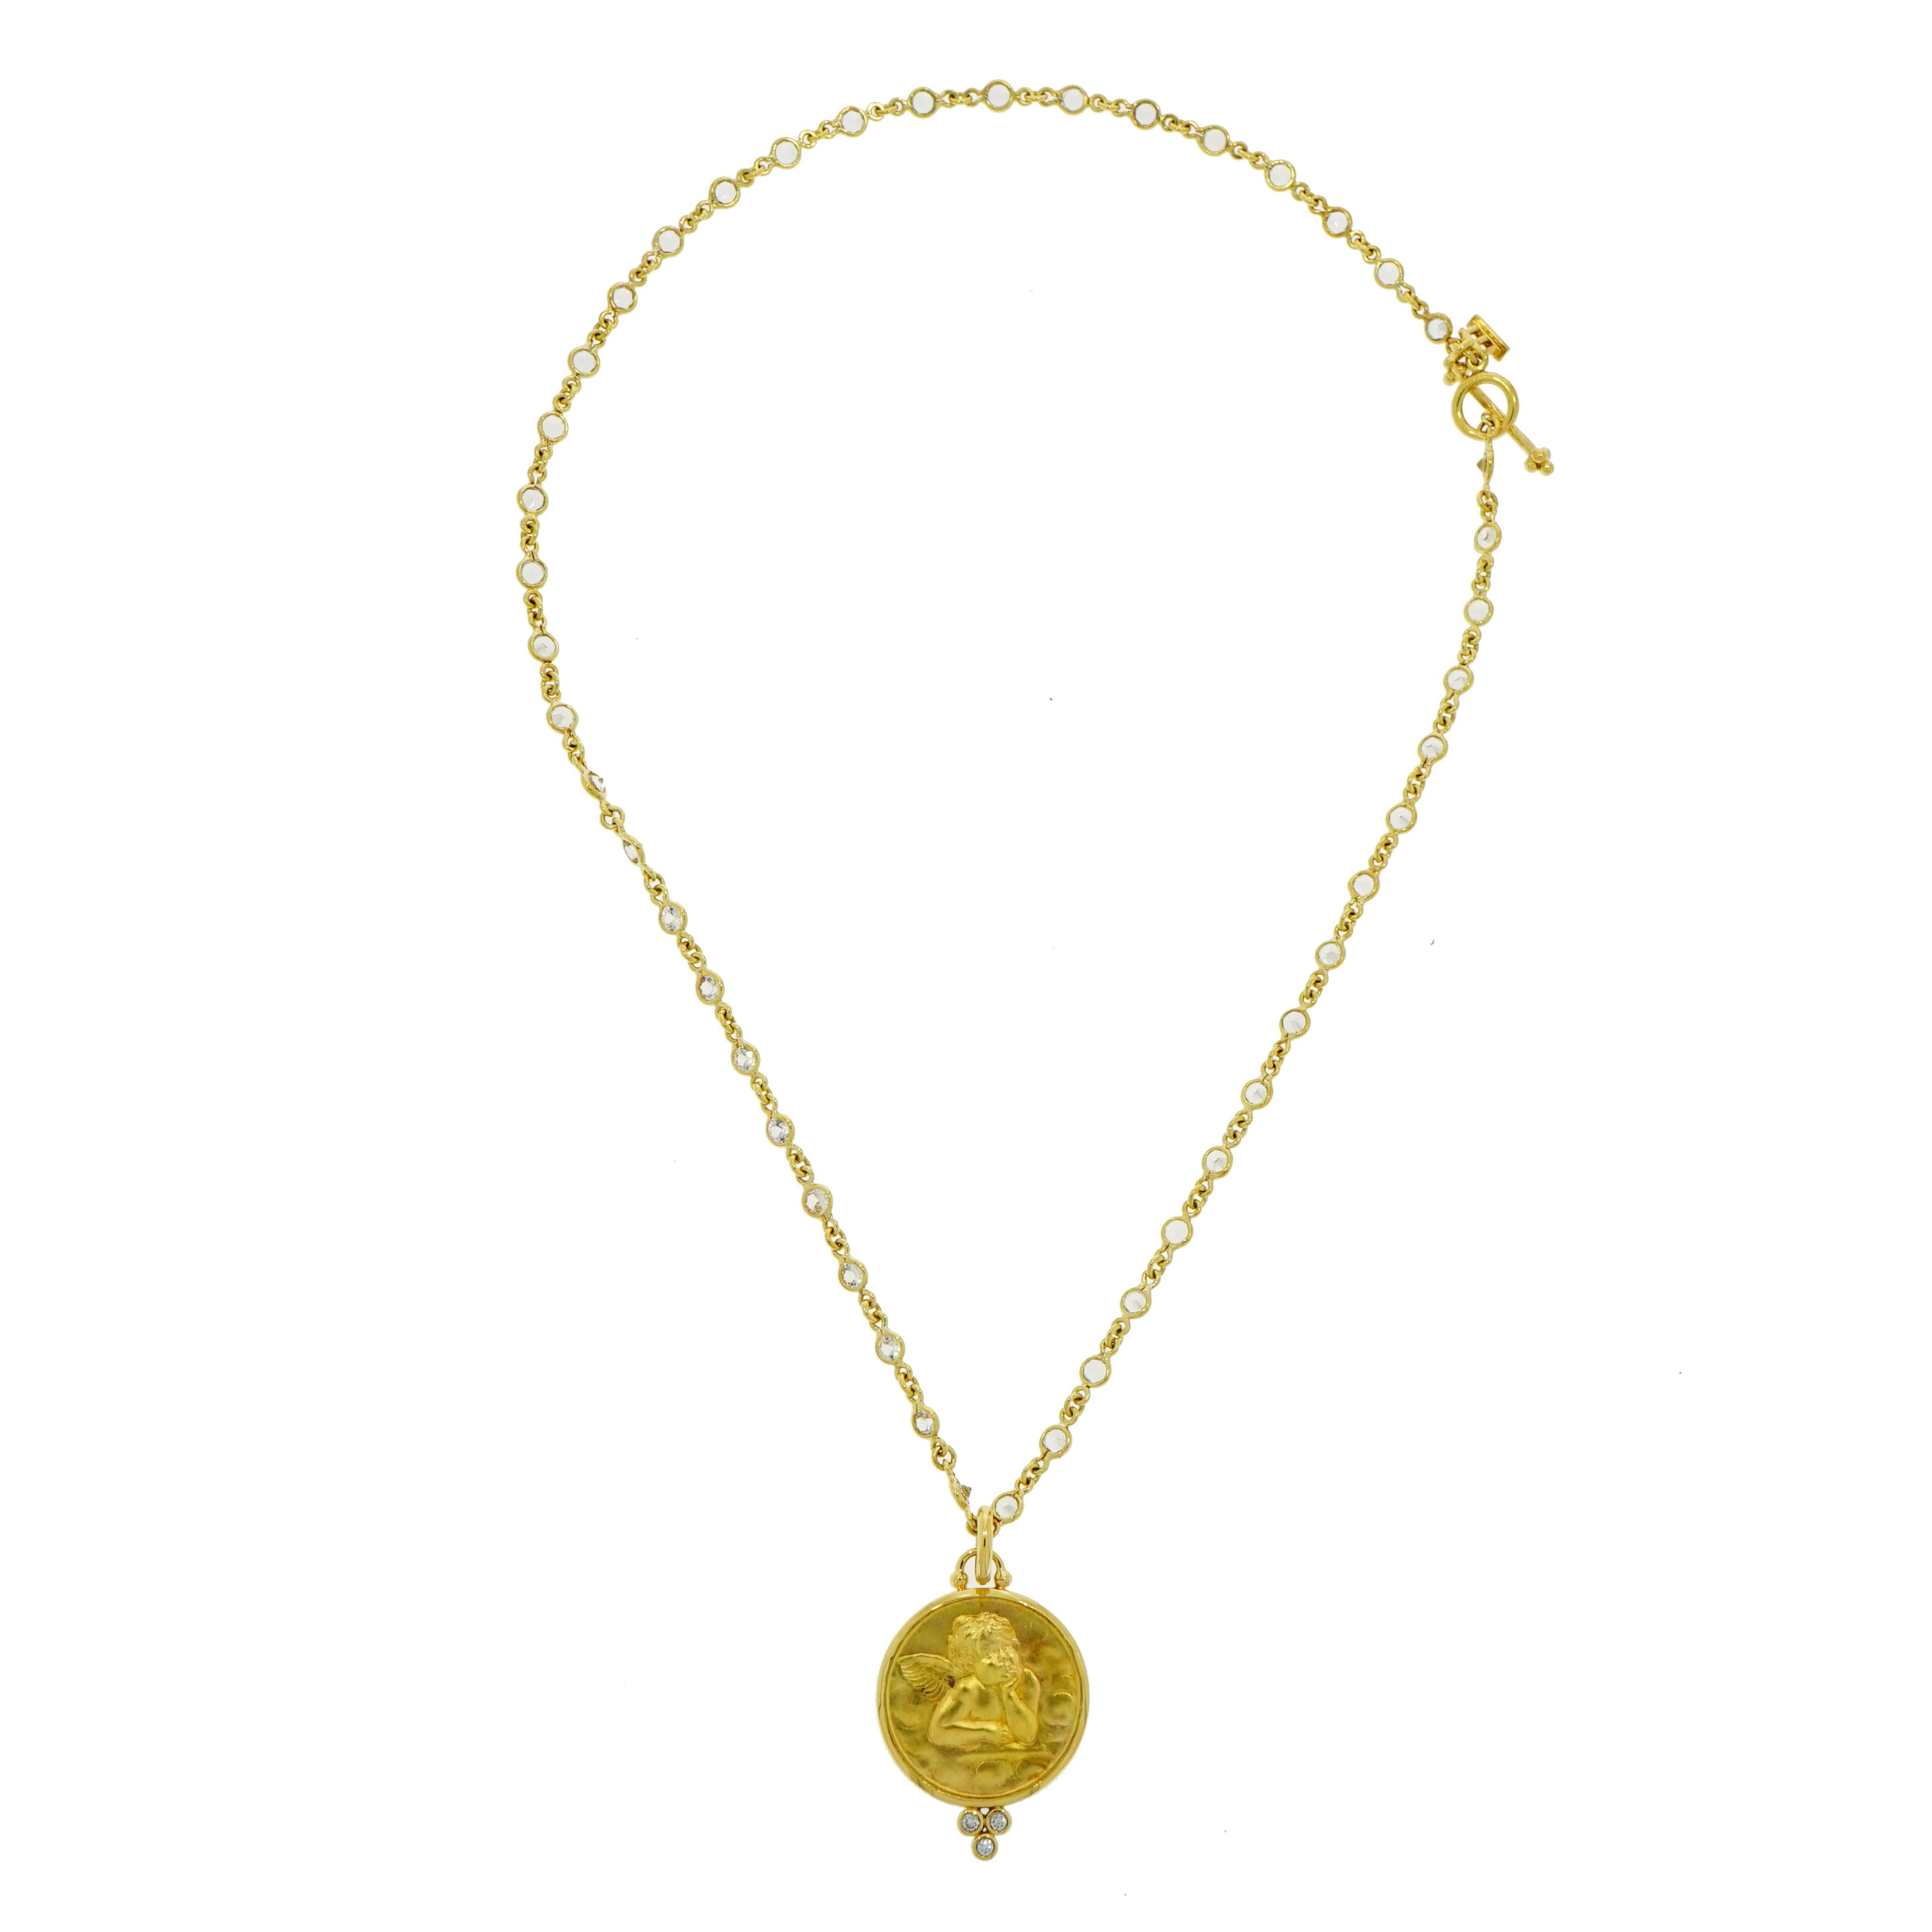 Temple St. Clair's jewelry are treasured by devoted collectors. This precious Angel Pendant is crafted in 18k yellow gold and measures 21mm in diameter, suspended from a 16 inch chain with 8.48 carat faceted white sapphire. Is a keepsake :)
